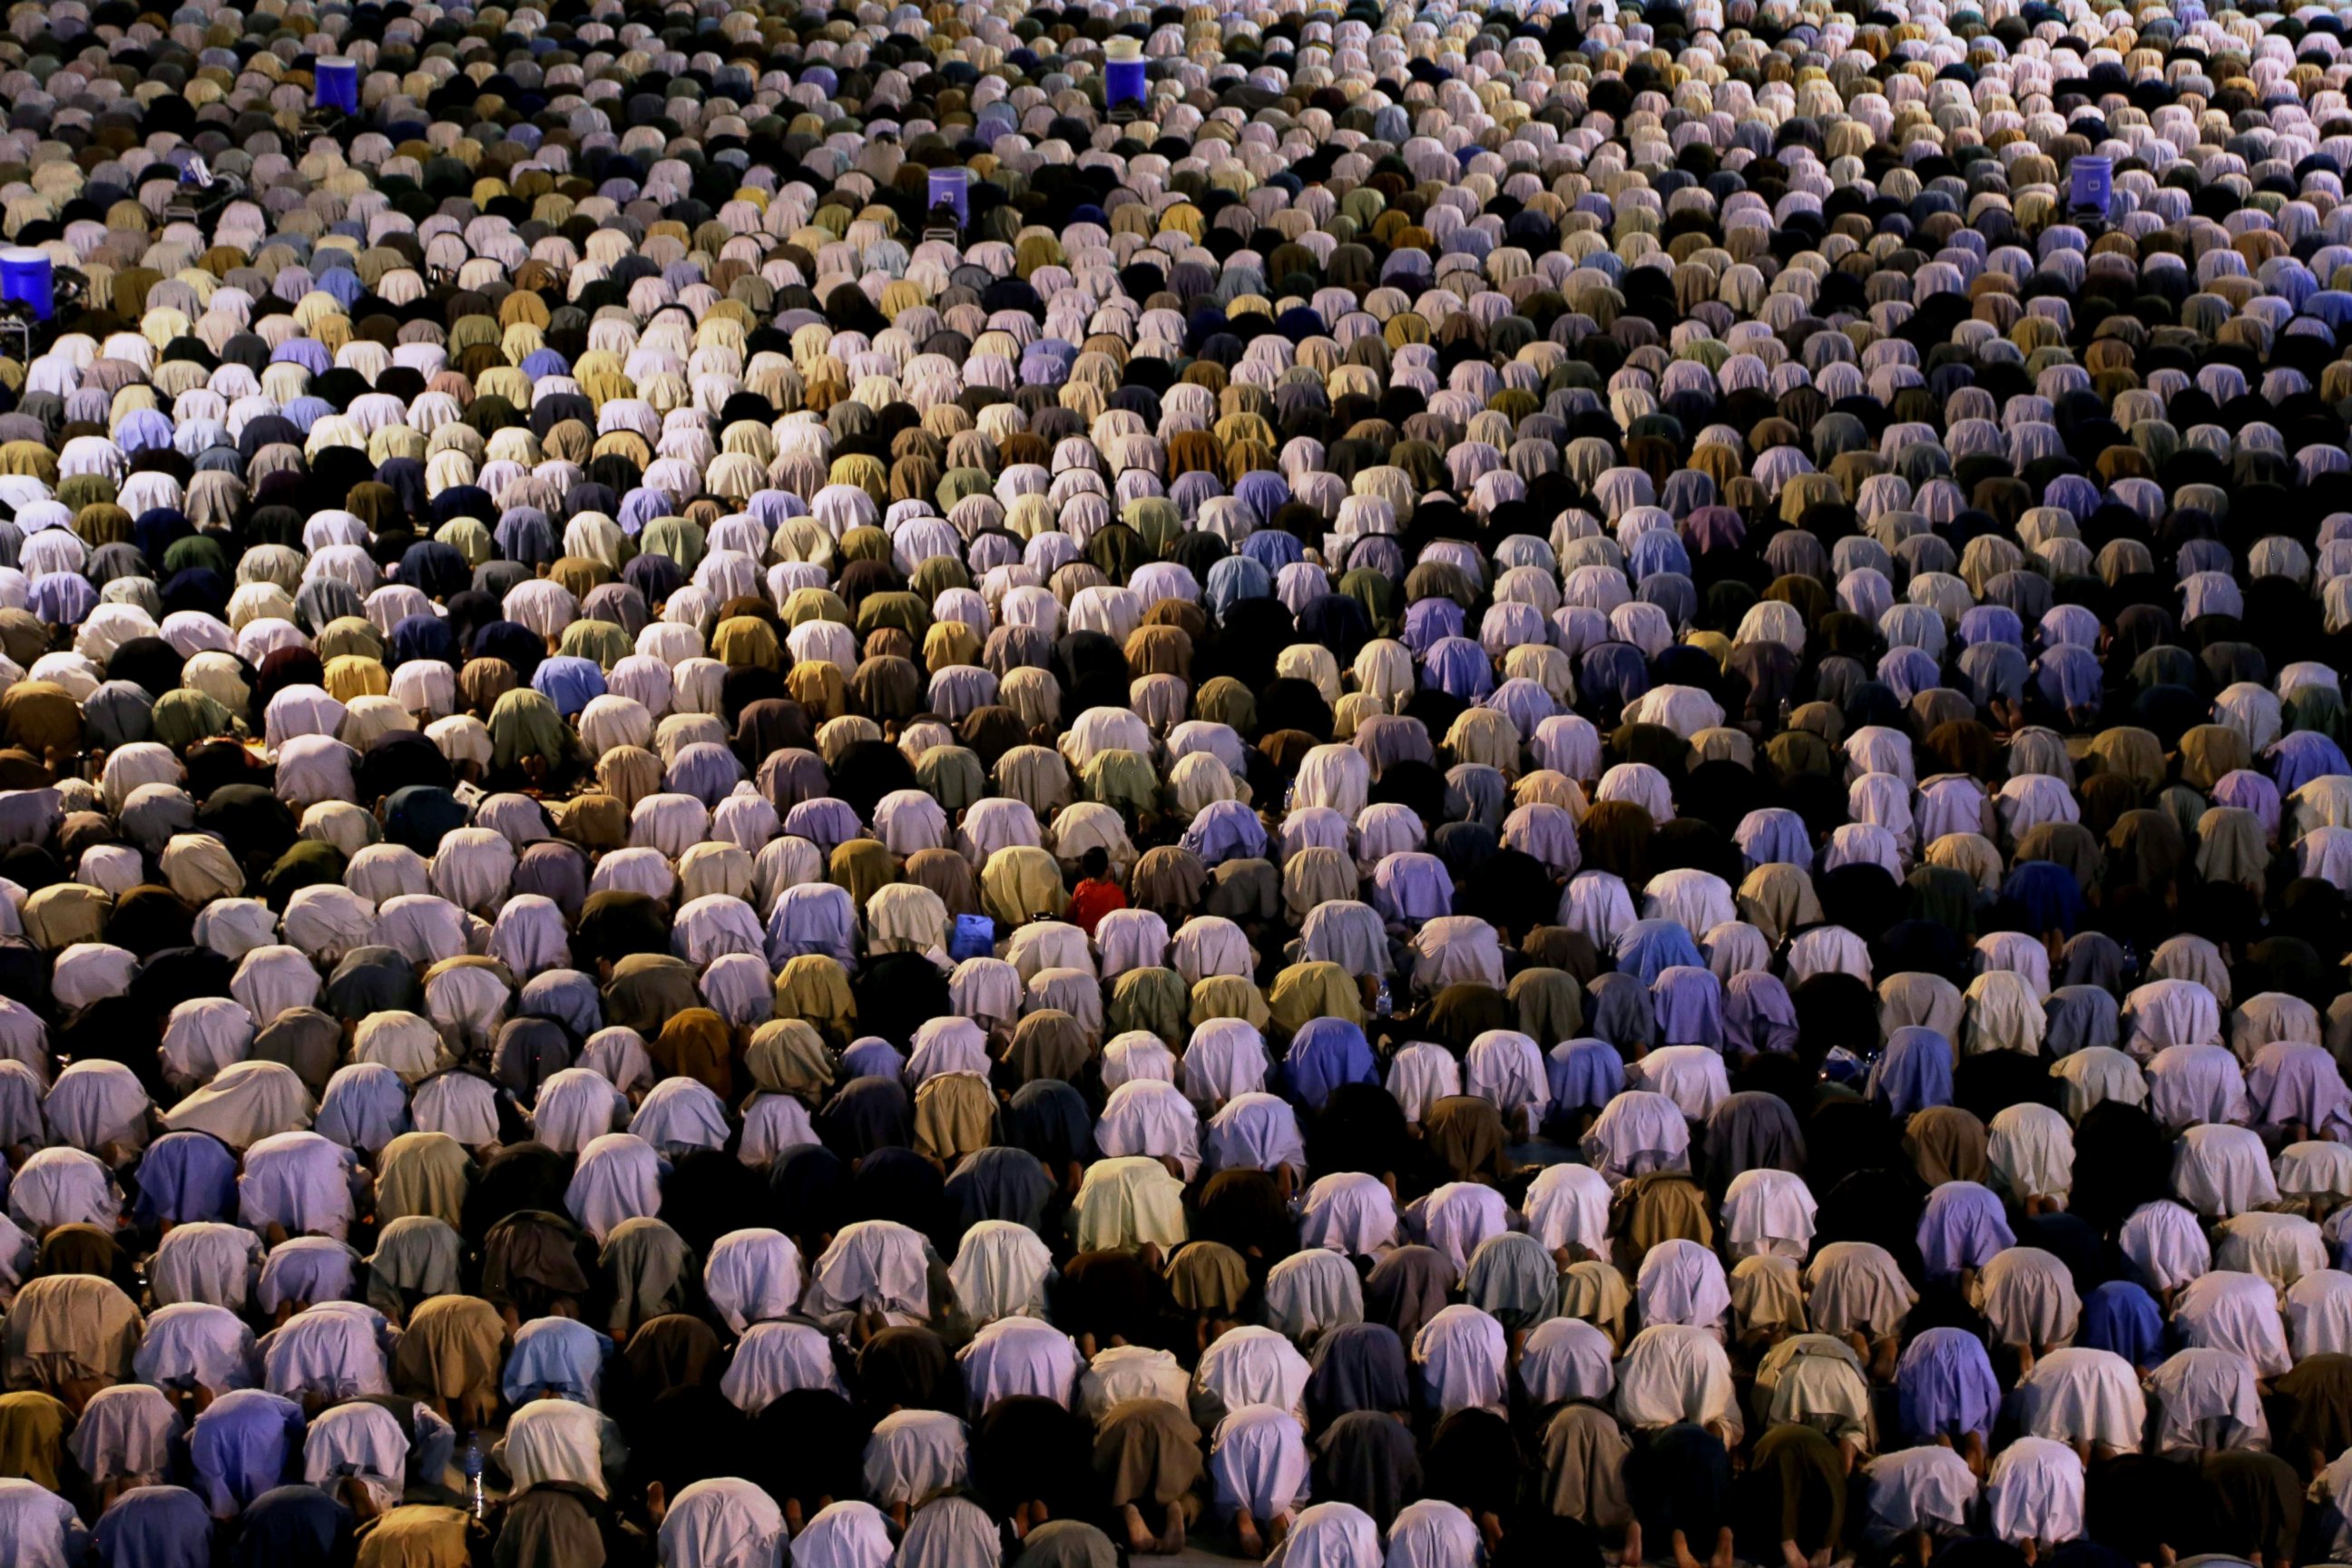 PHOTO: Muslims perform the Tarawih prayer during the holy month of Ramadan at Jami Mosque in Herat Province, Afghanistan, June 21, 2016.